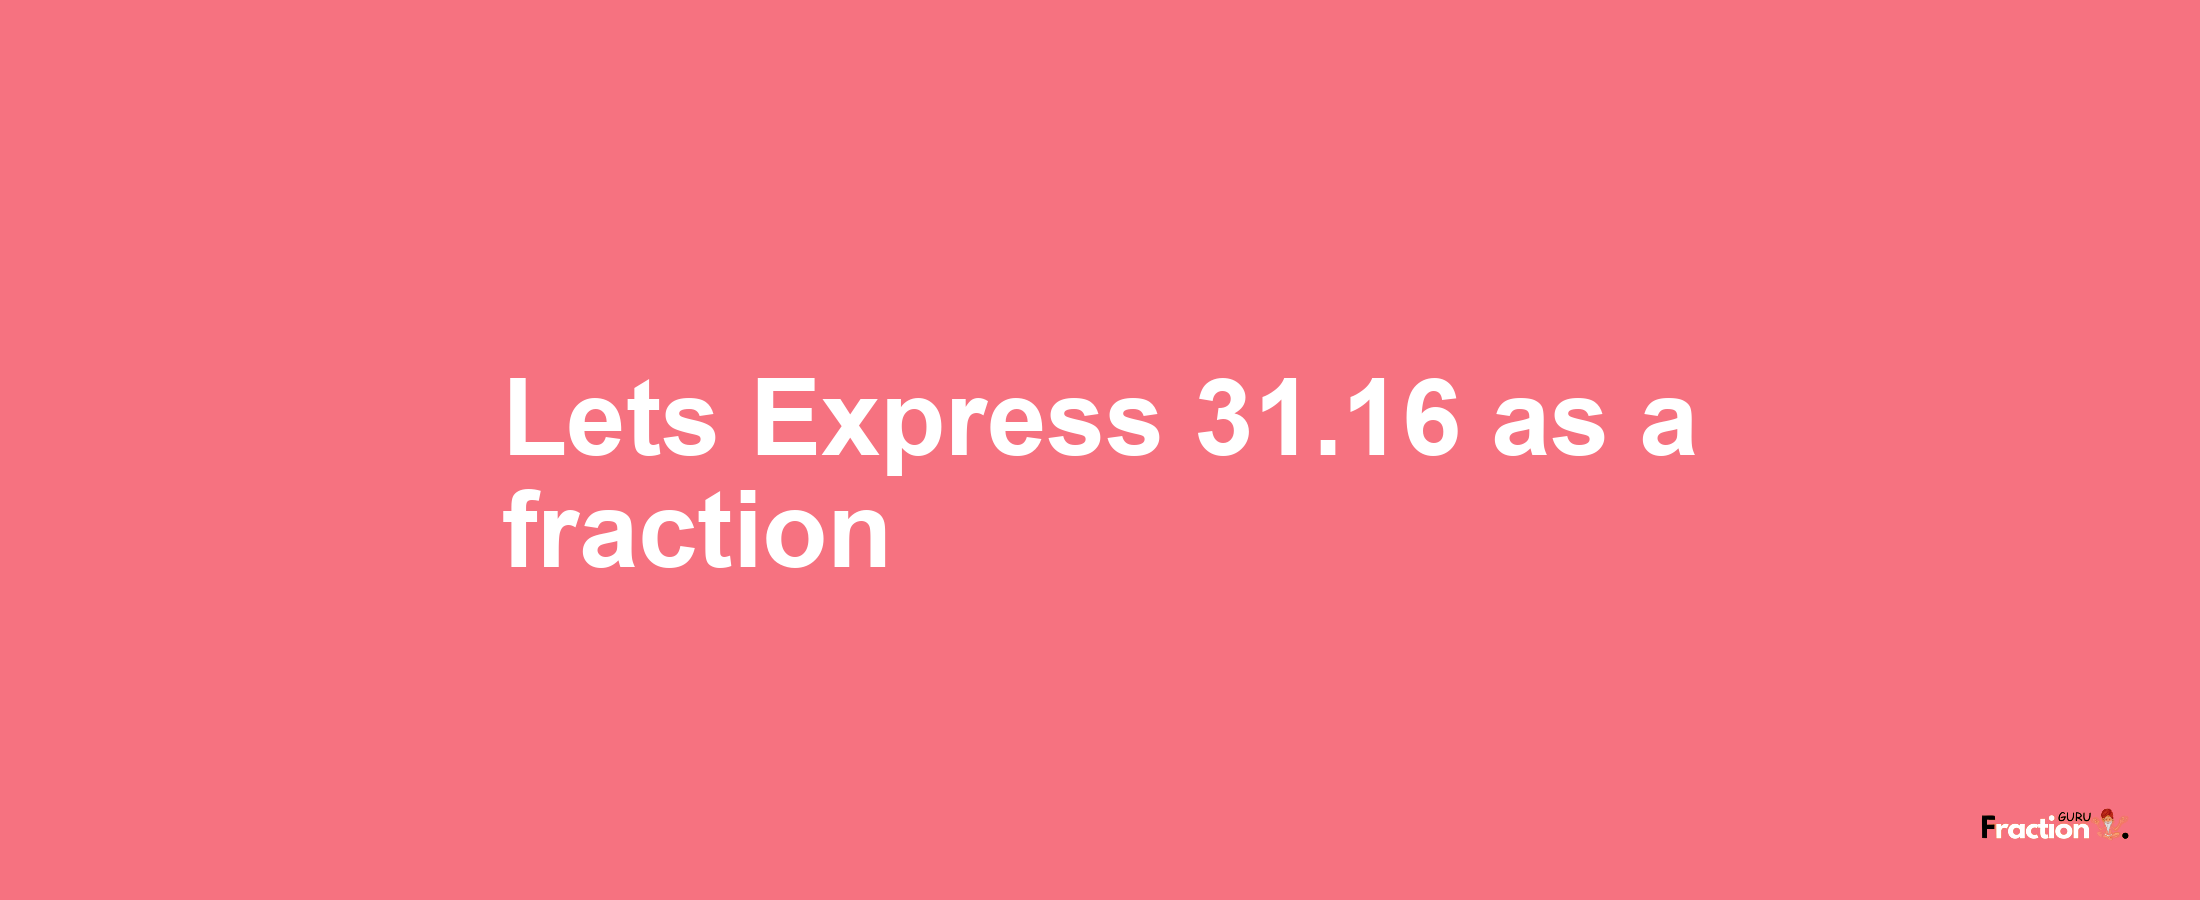 Lets Express 31.16 as afraction